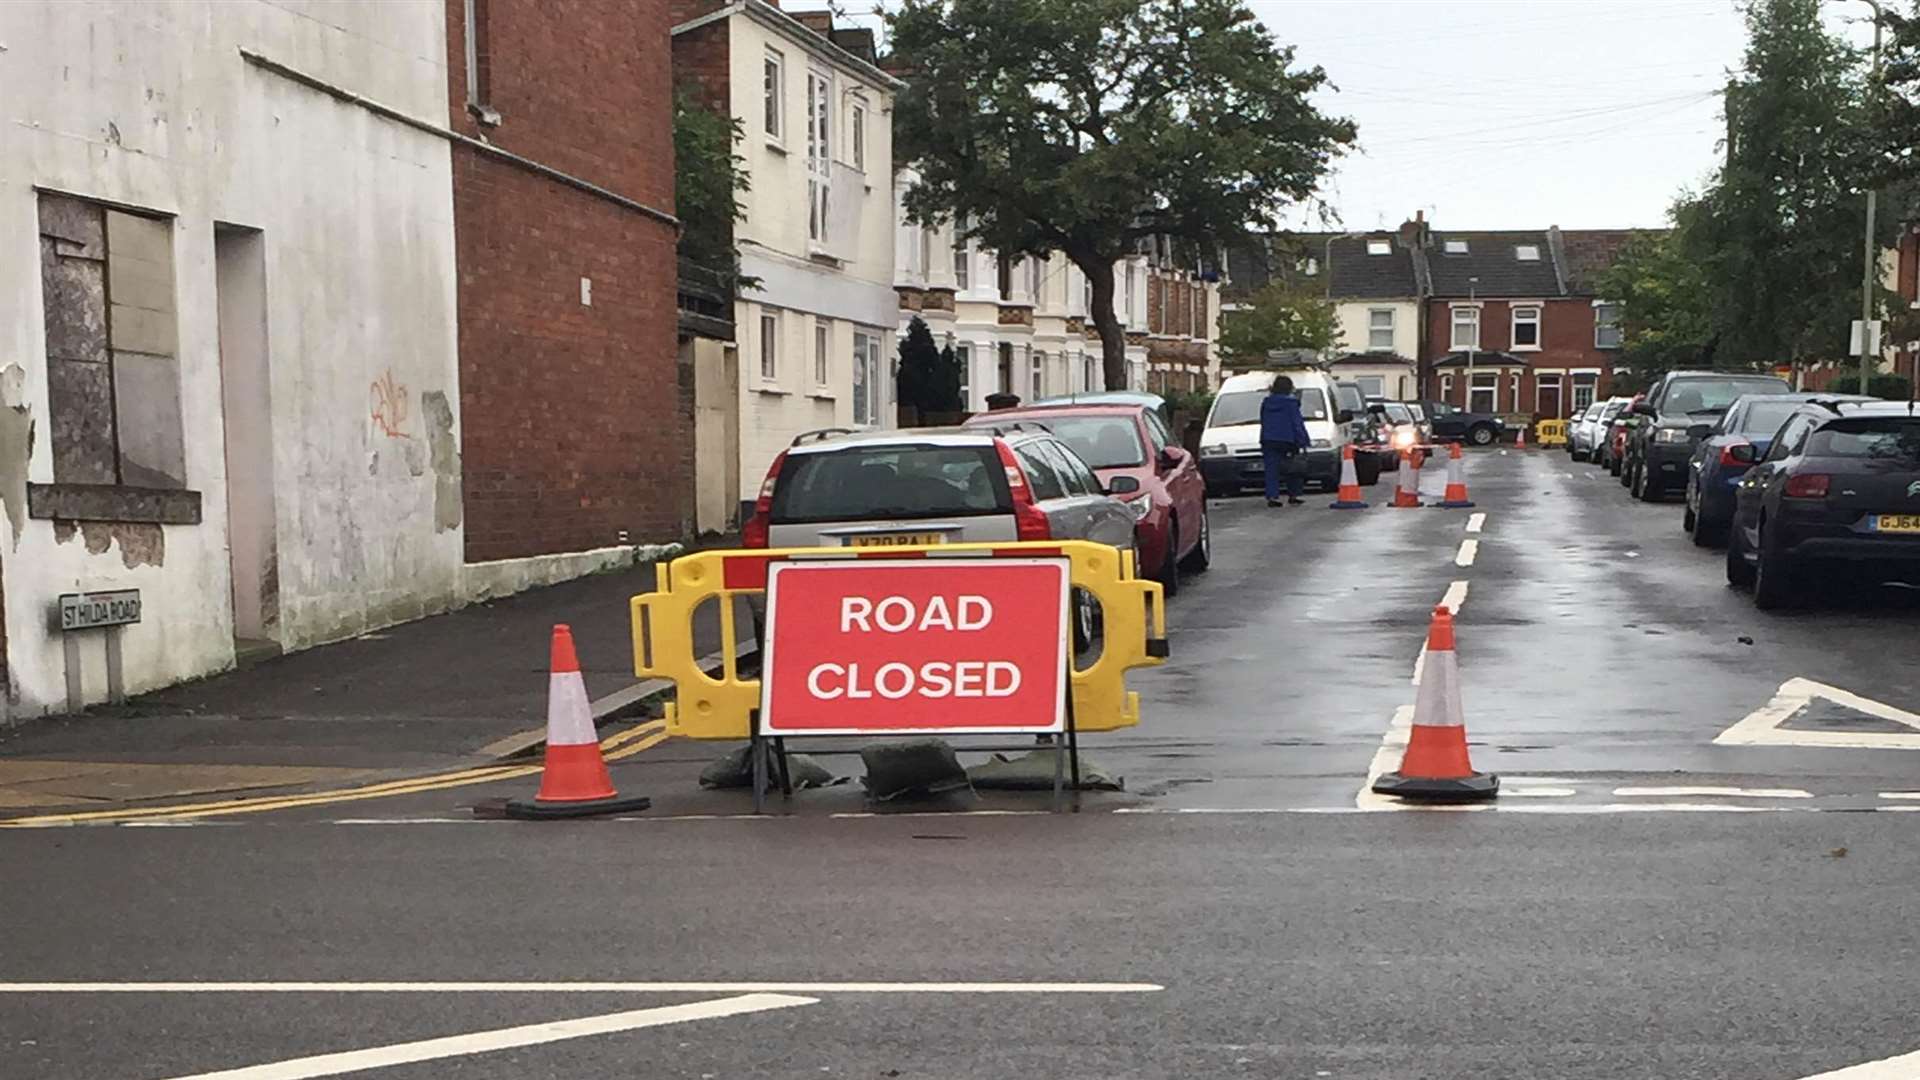 The road is closed